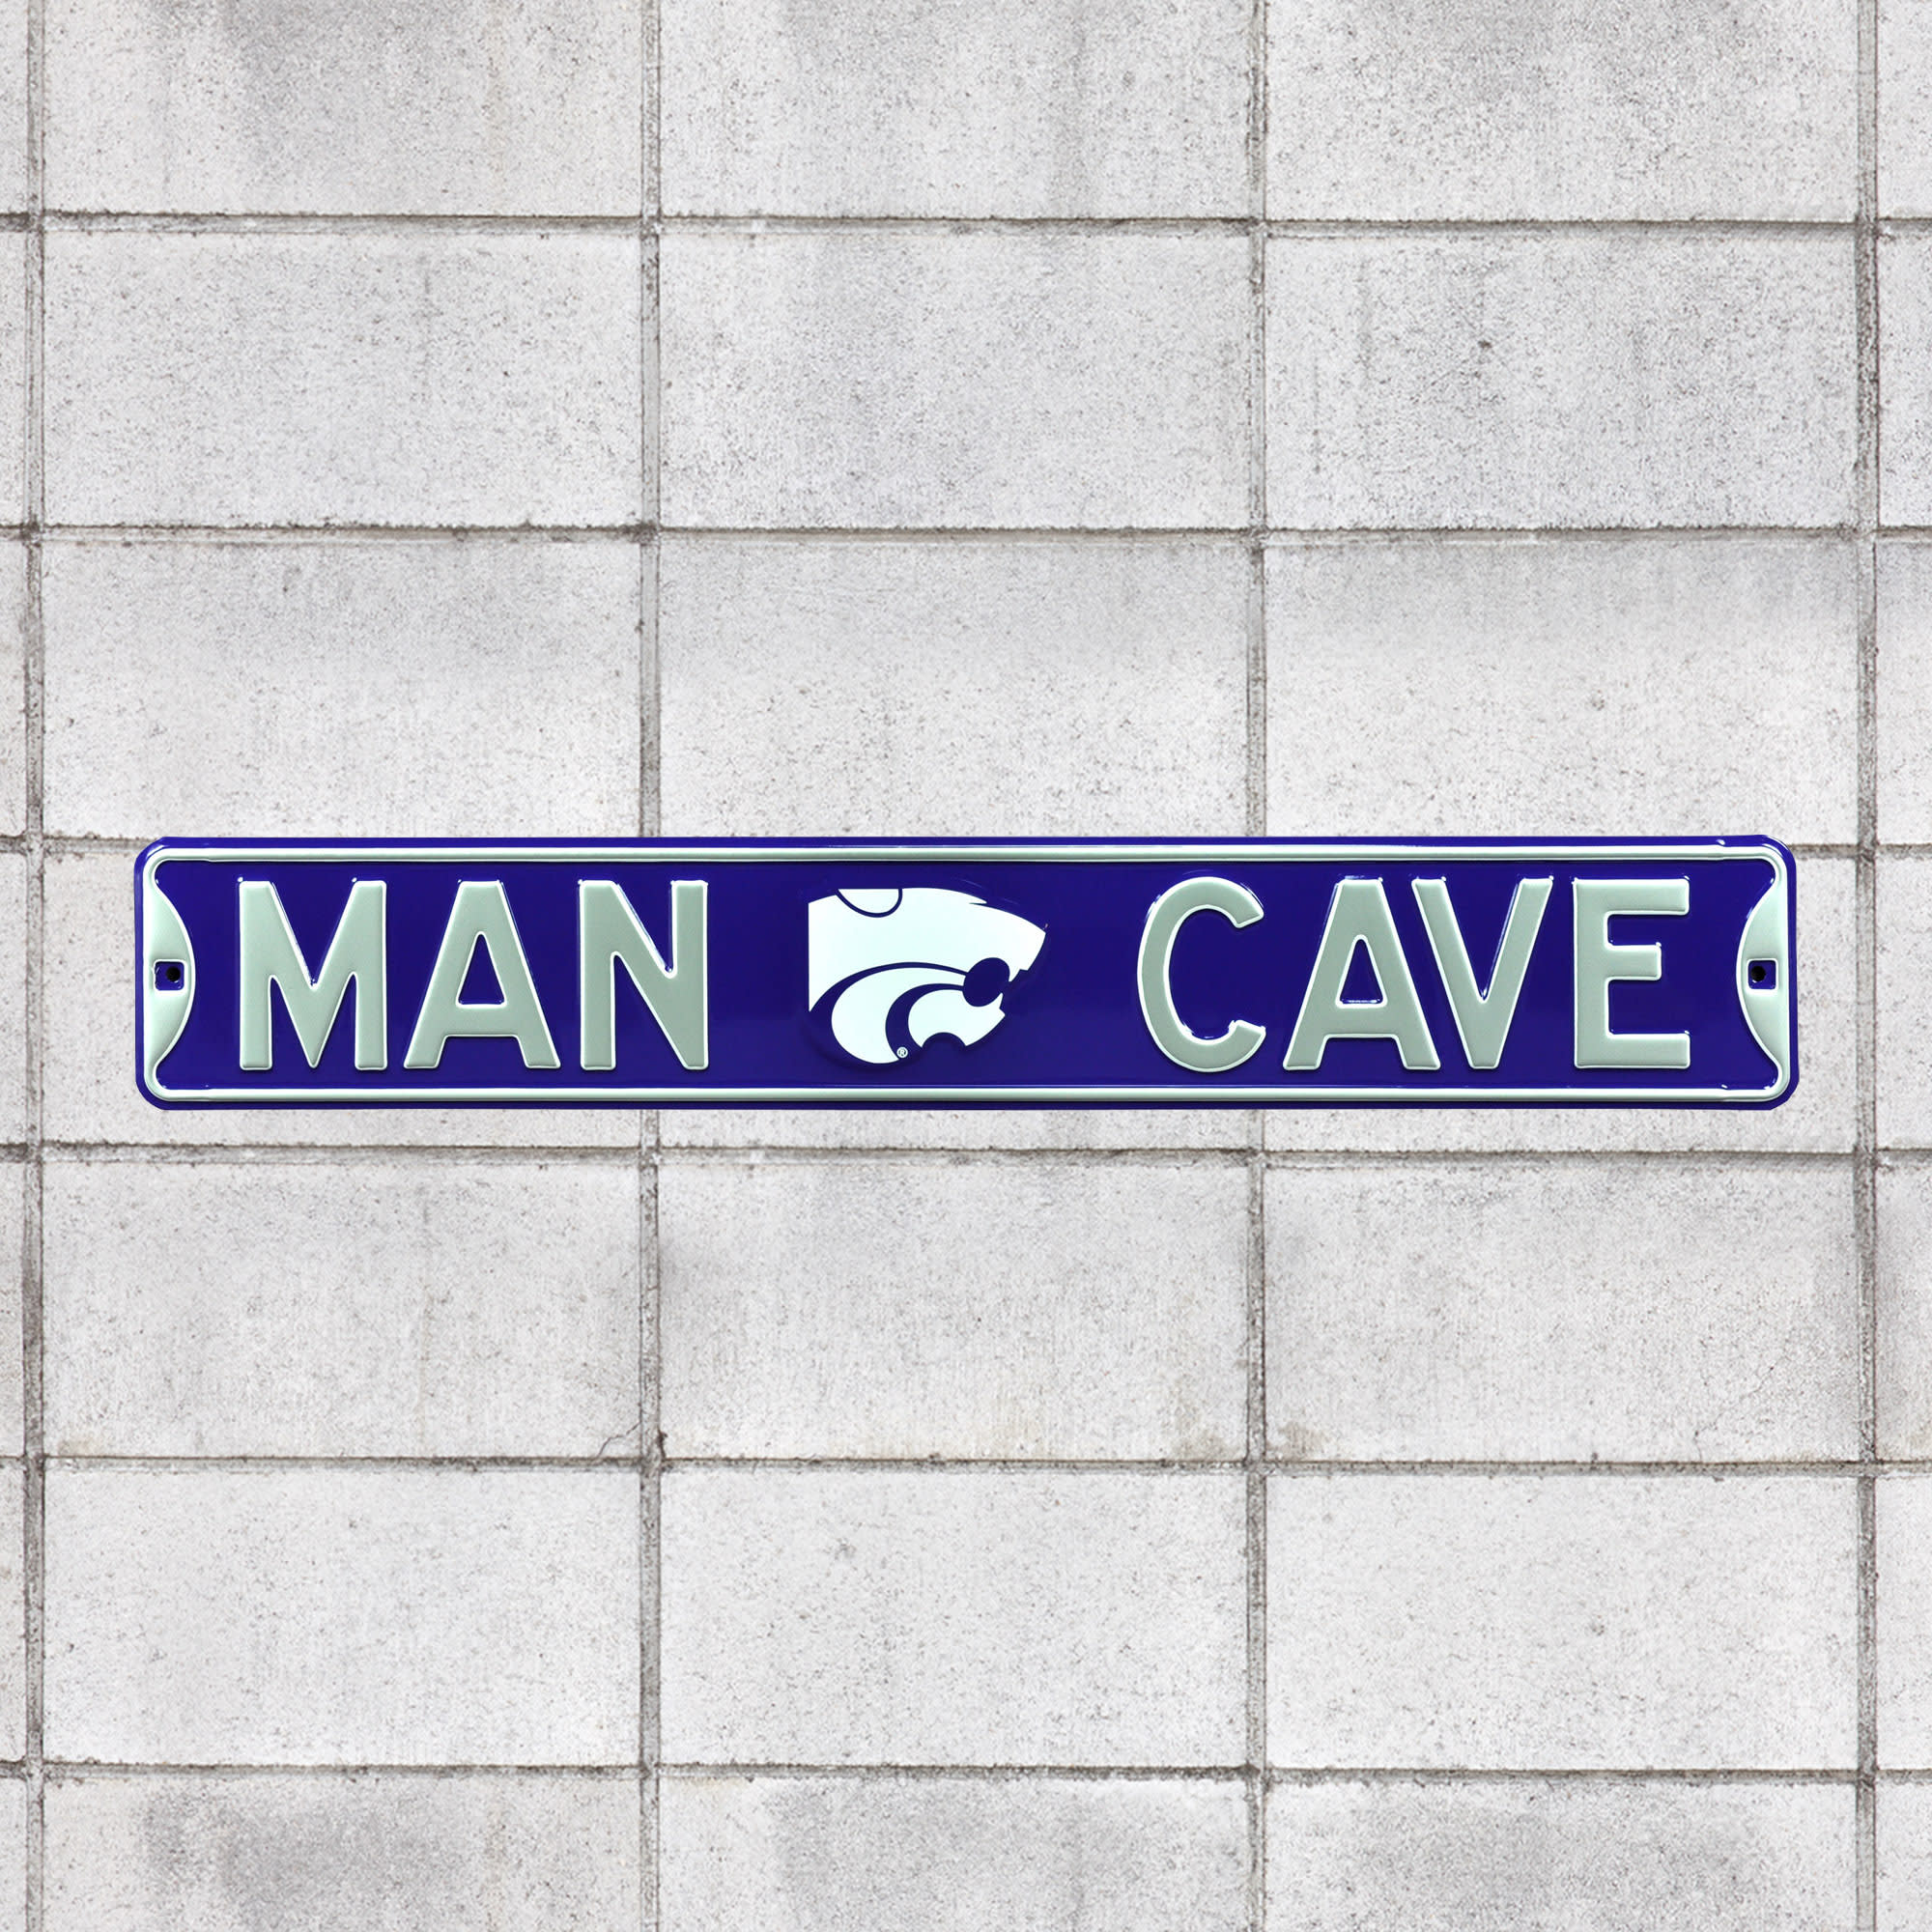 Kansas State Wildcats: Man Cave - Officially Licensed Metal Street Sign 36.0"W x 6.0"H by Fathead | 100% Steel